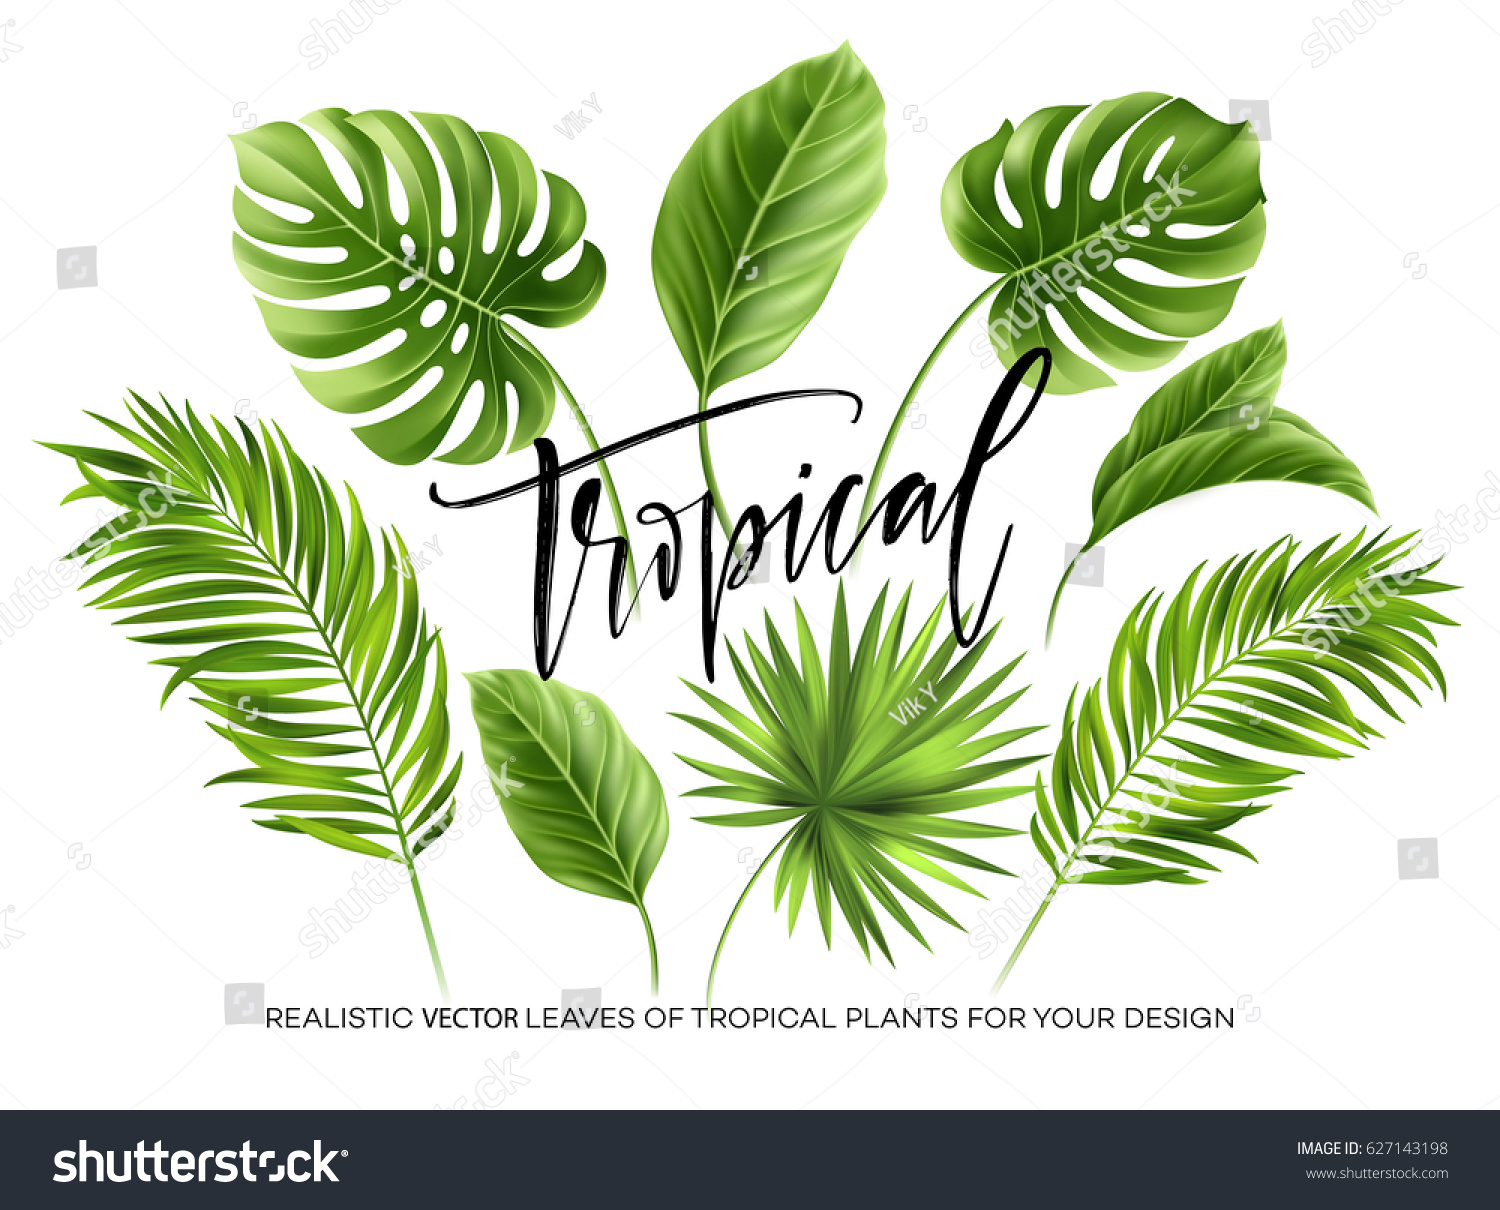 278,065 Palm leaf drawings Images, Stock Photos & Vectors | Shutterstock